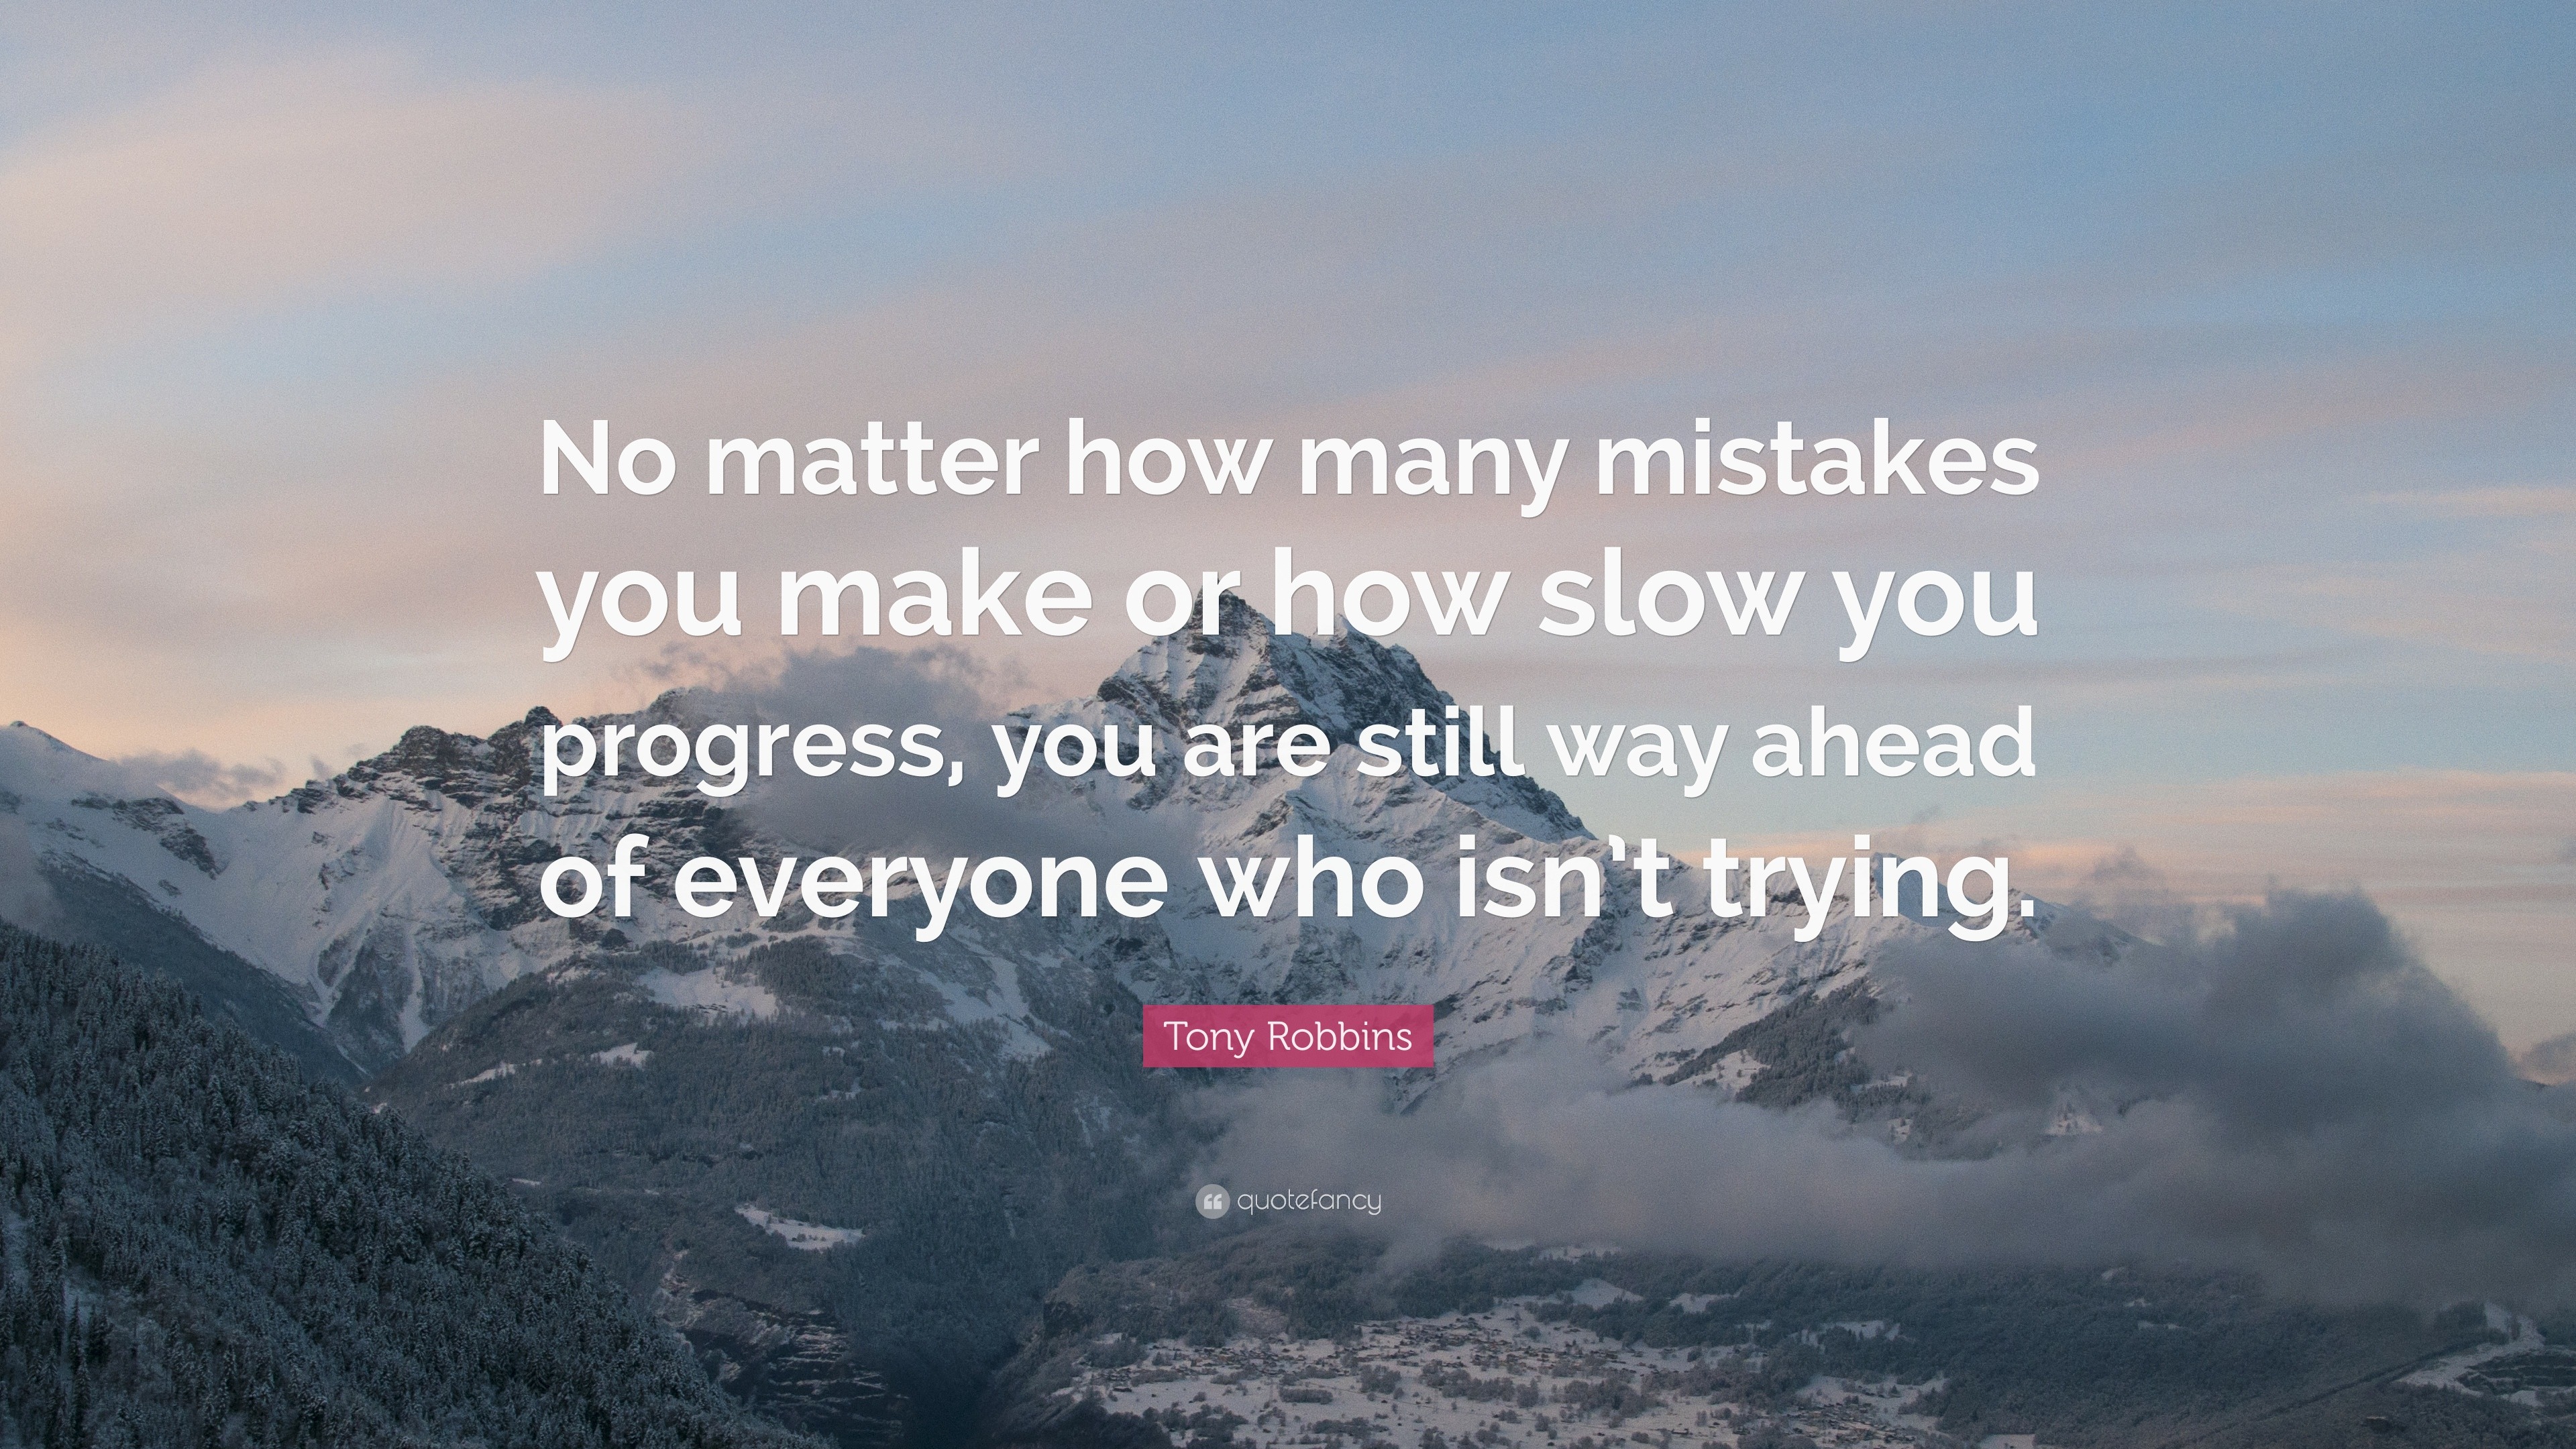 quotes about making mistakes